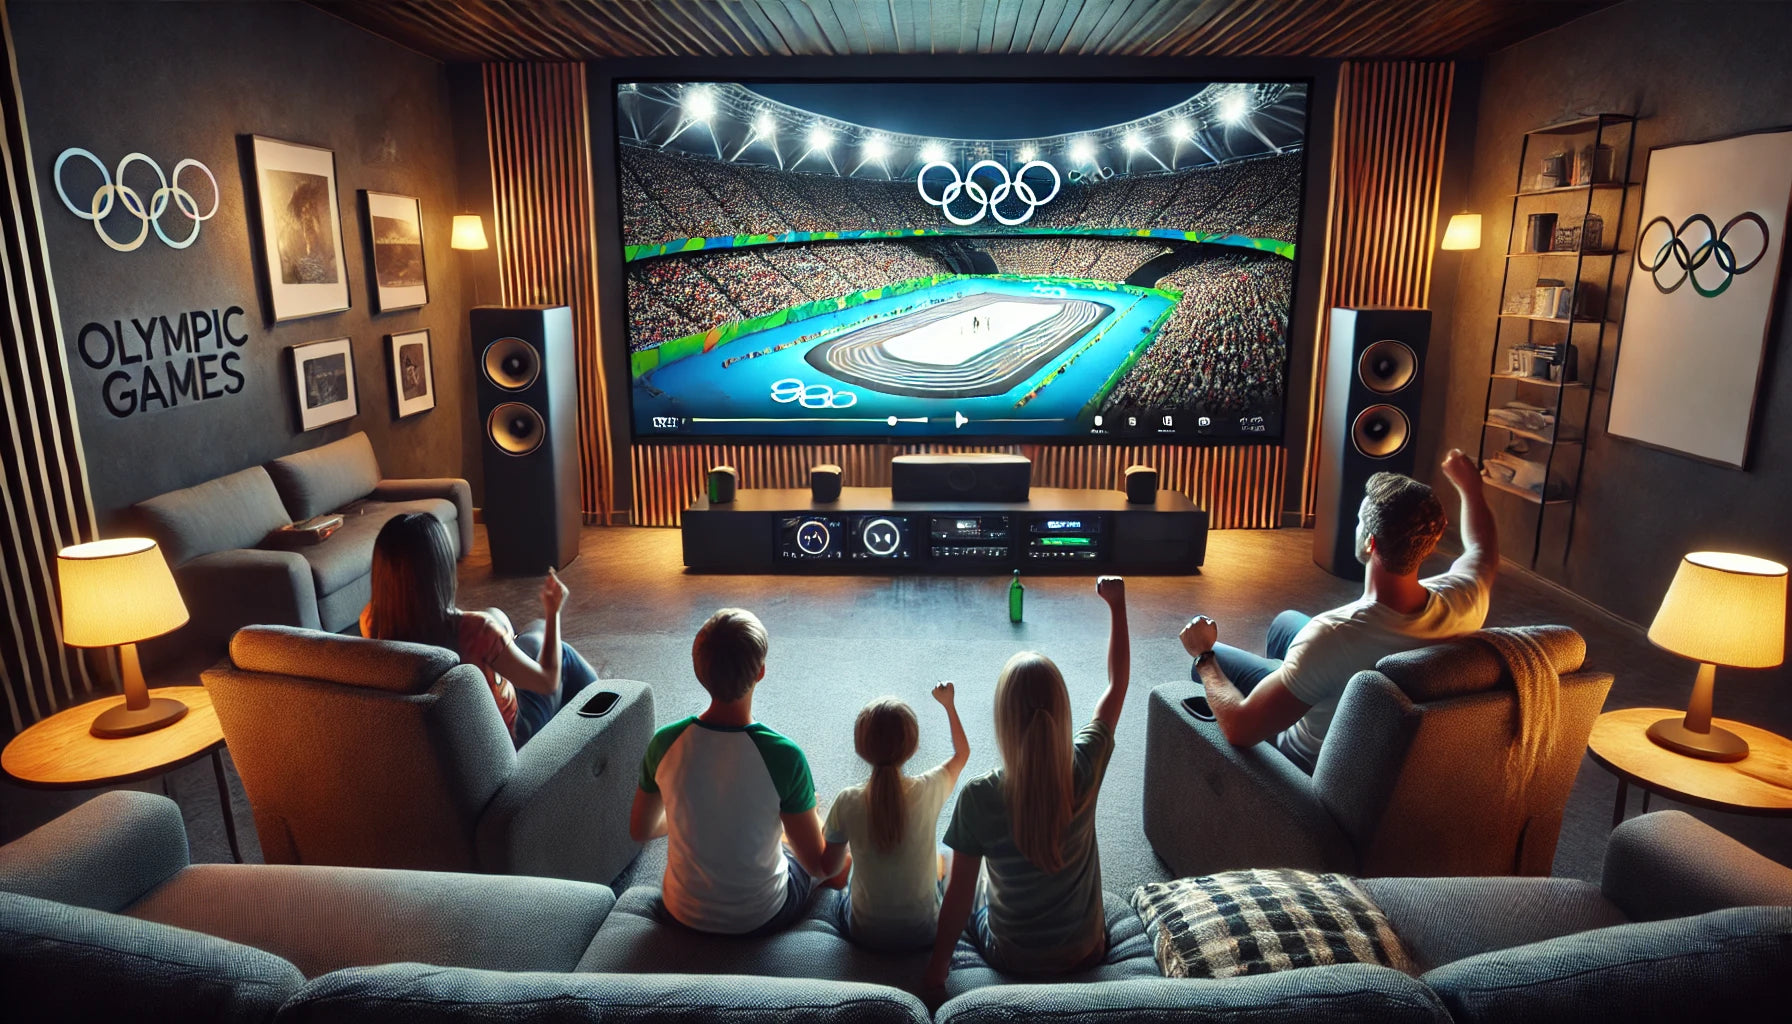 Family watching the Olympic Games in a cozy home theater.